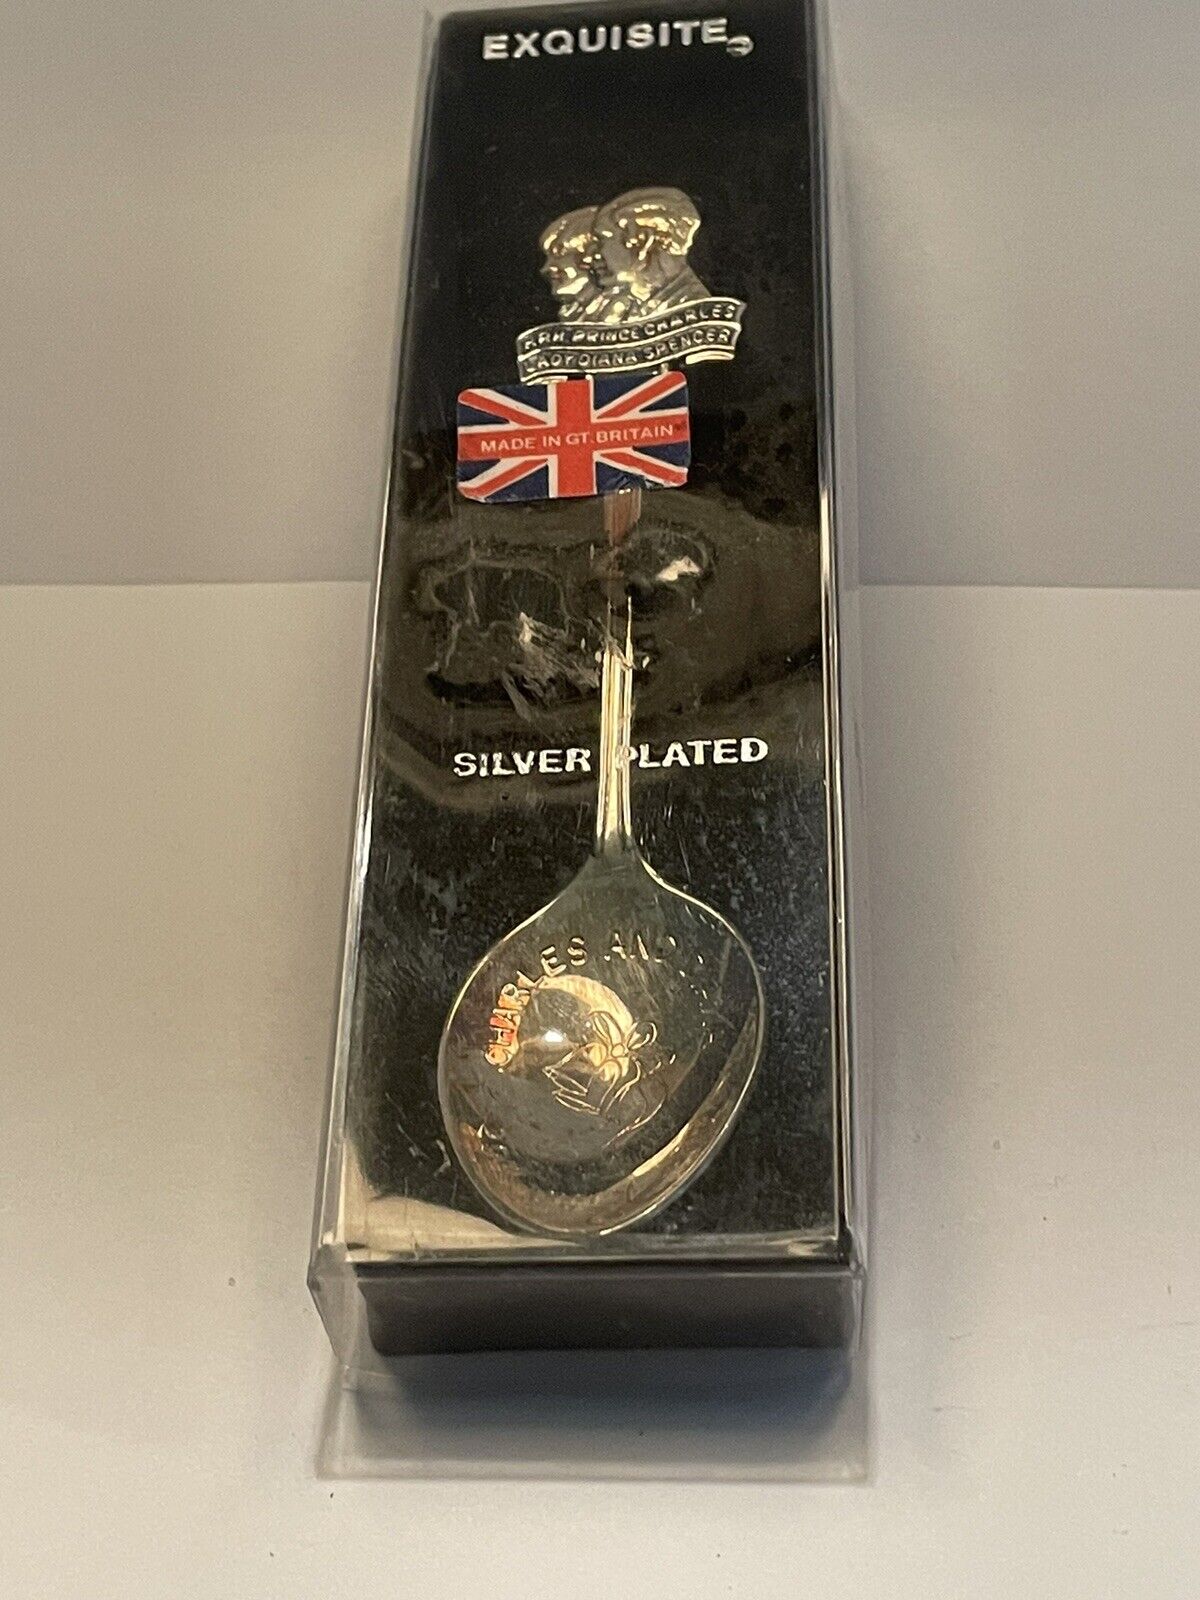 EXQUISITE Silver Played Collector Spoon 1981 Great Britain Charles & Diana